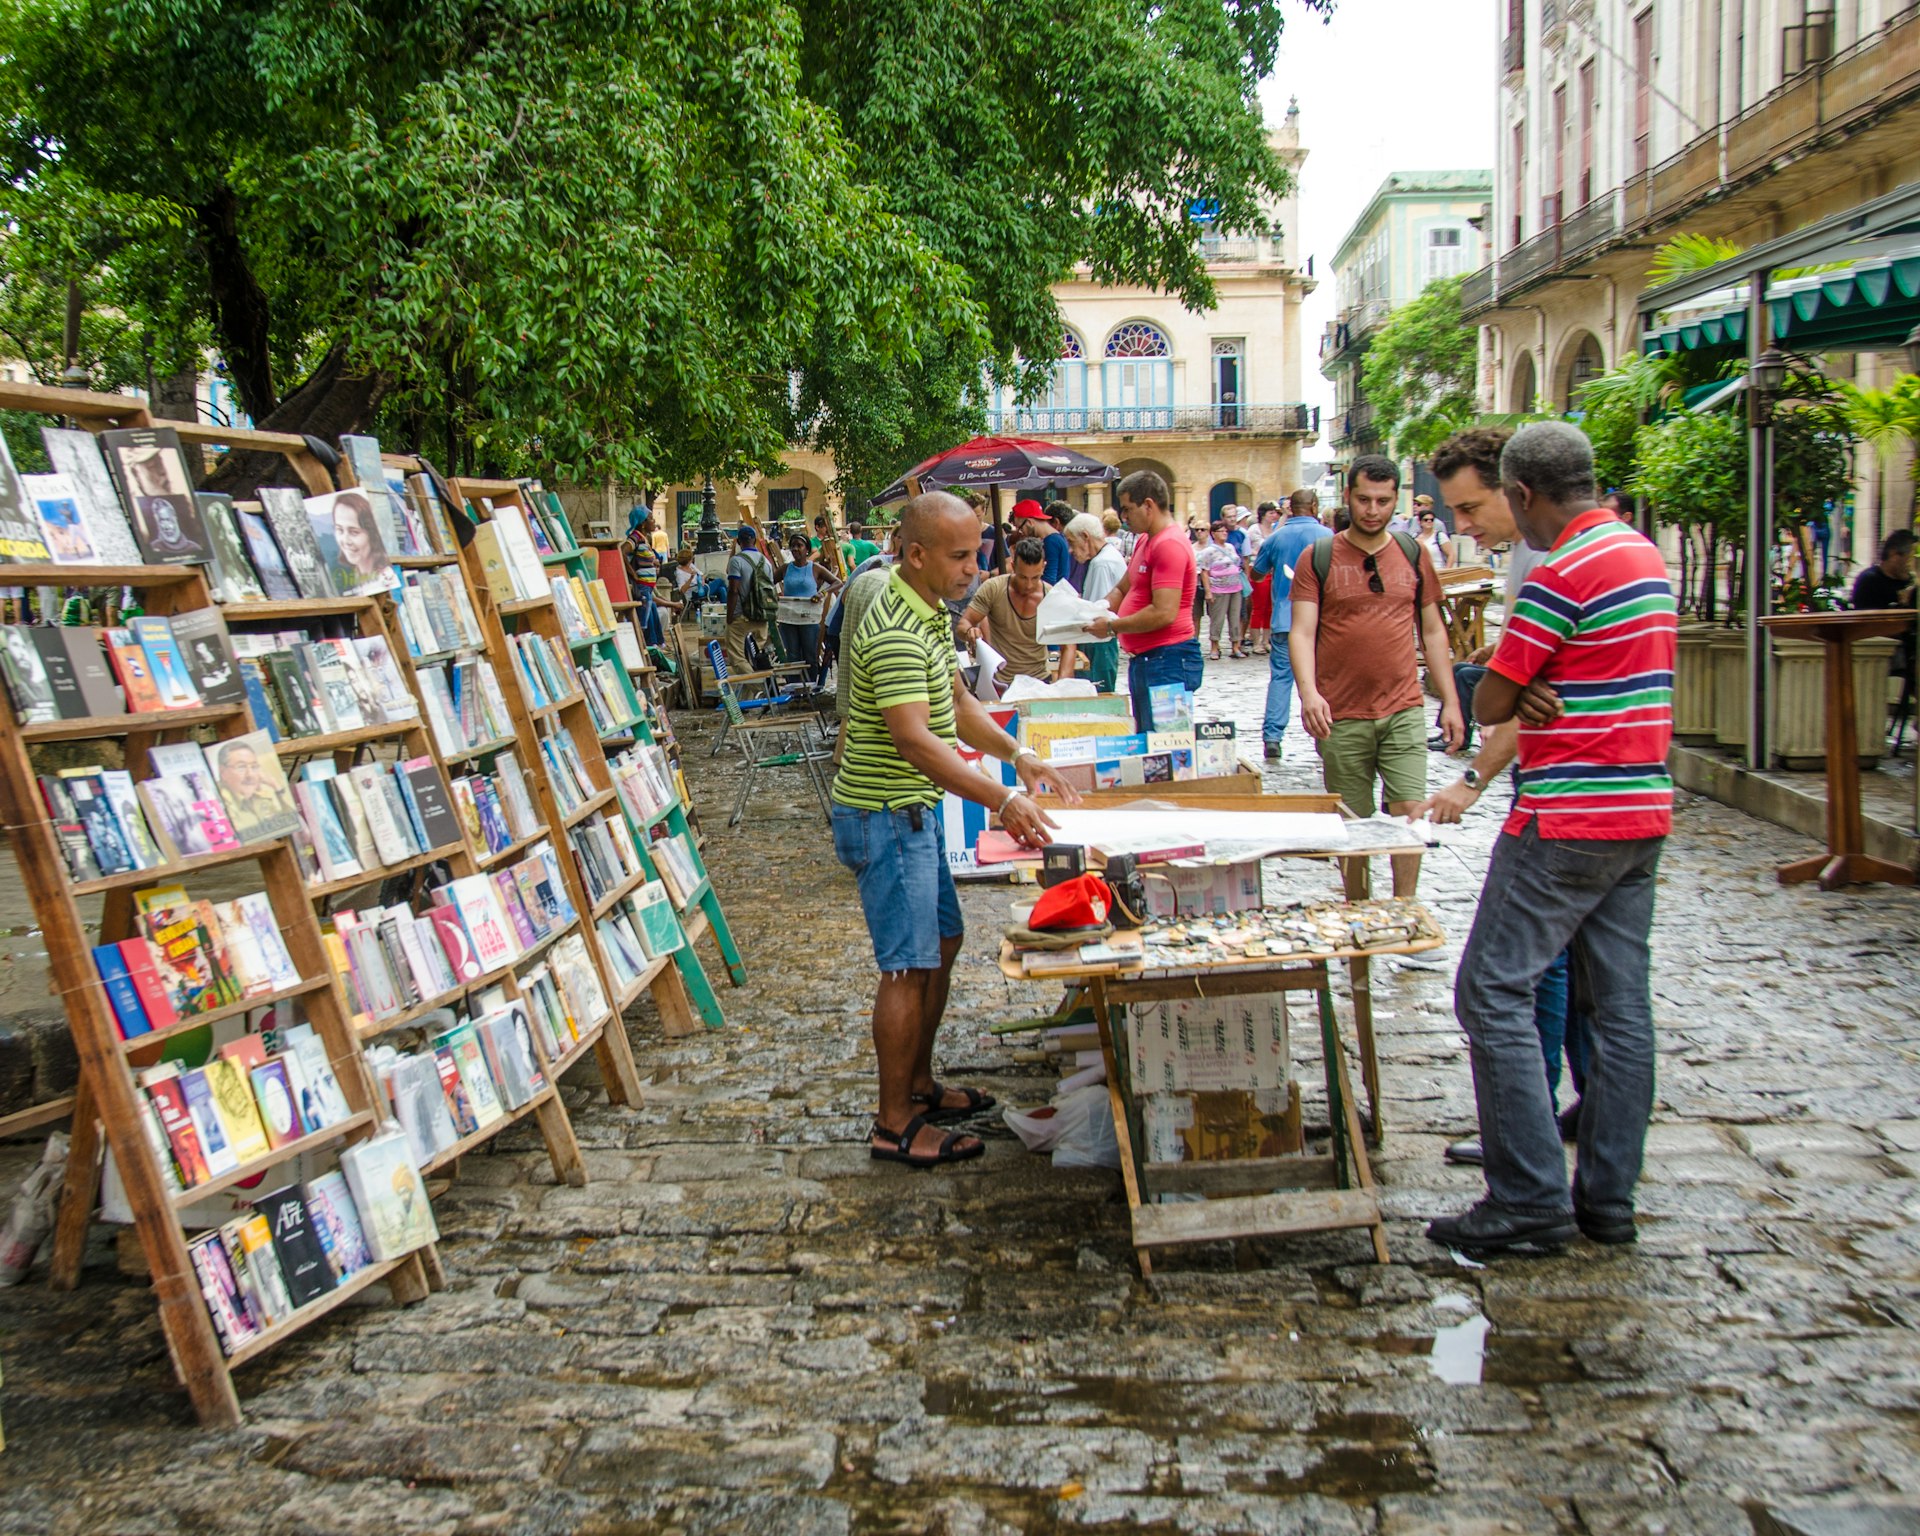  Tourists examine a poster at one of the stalls at Plaza de Armas selling books